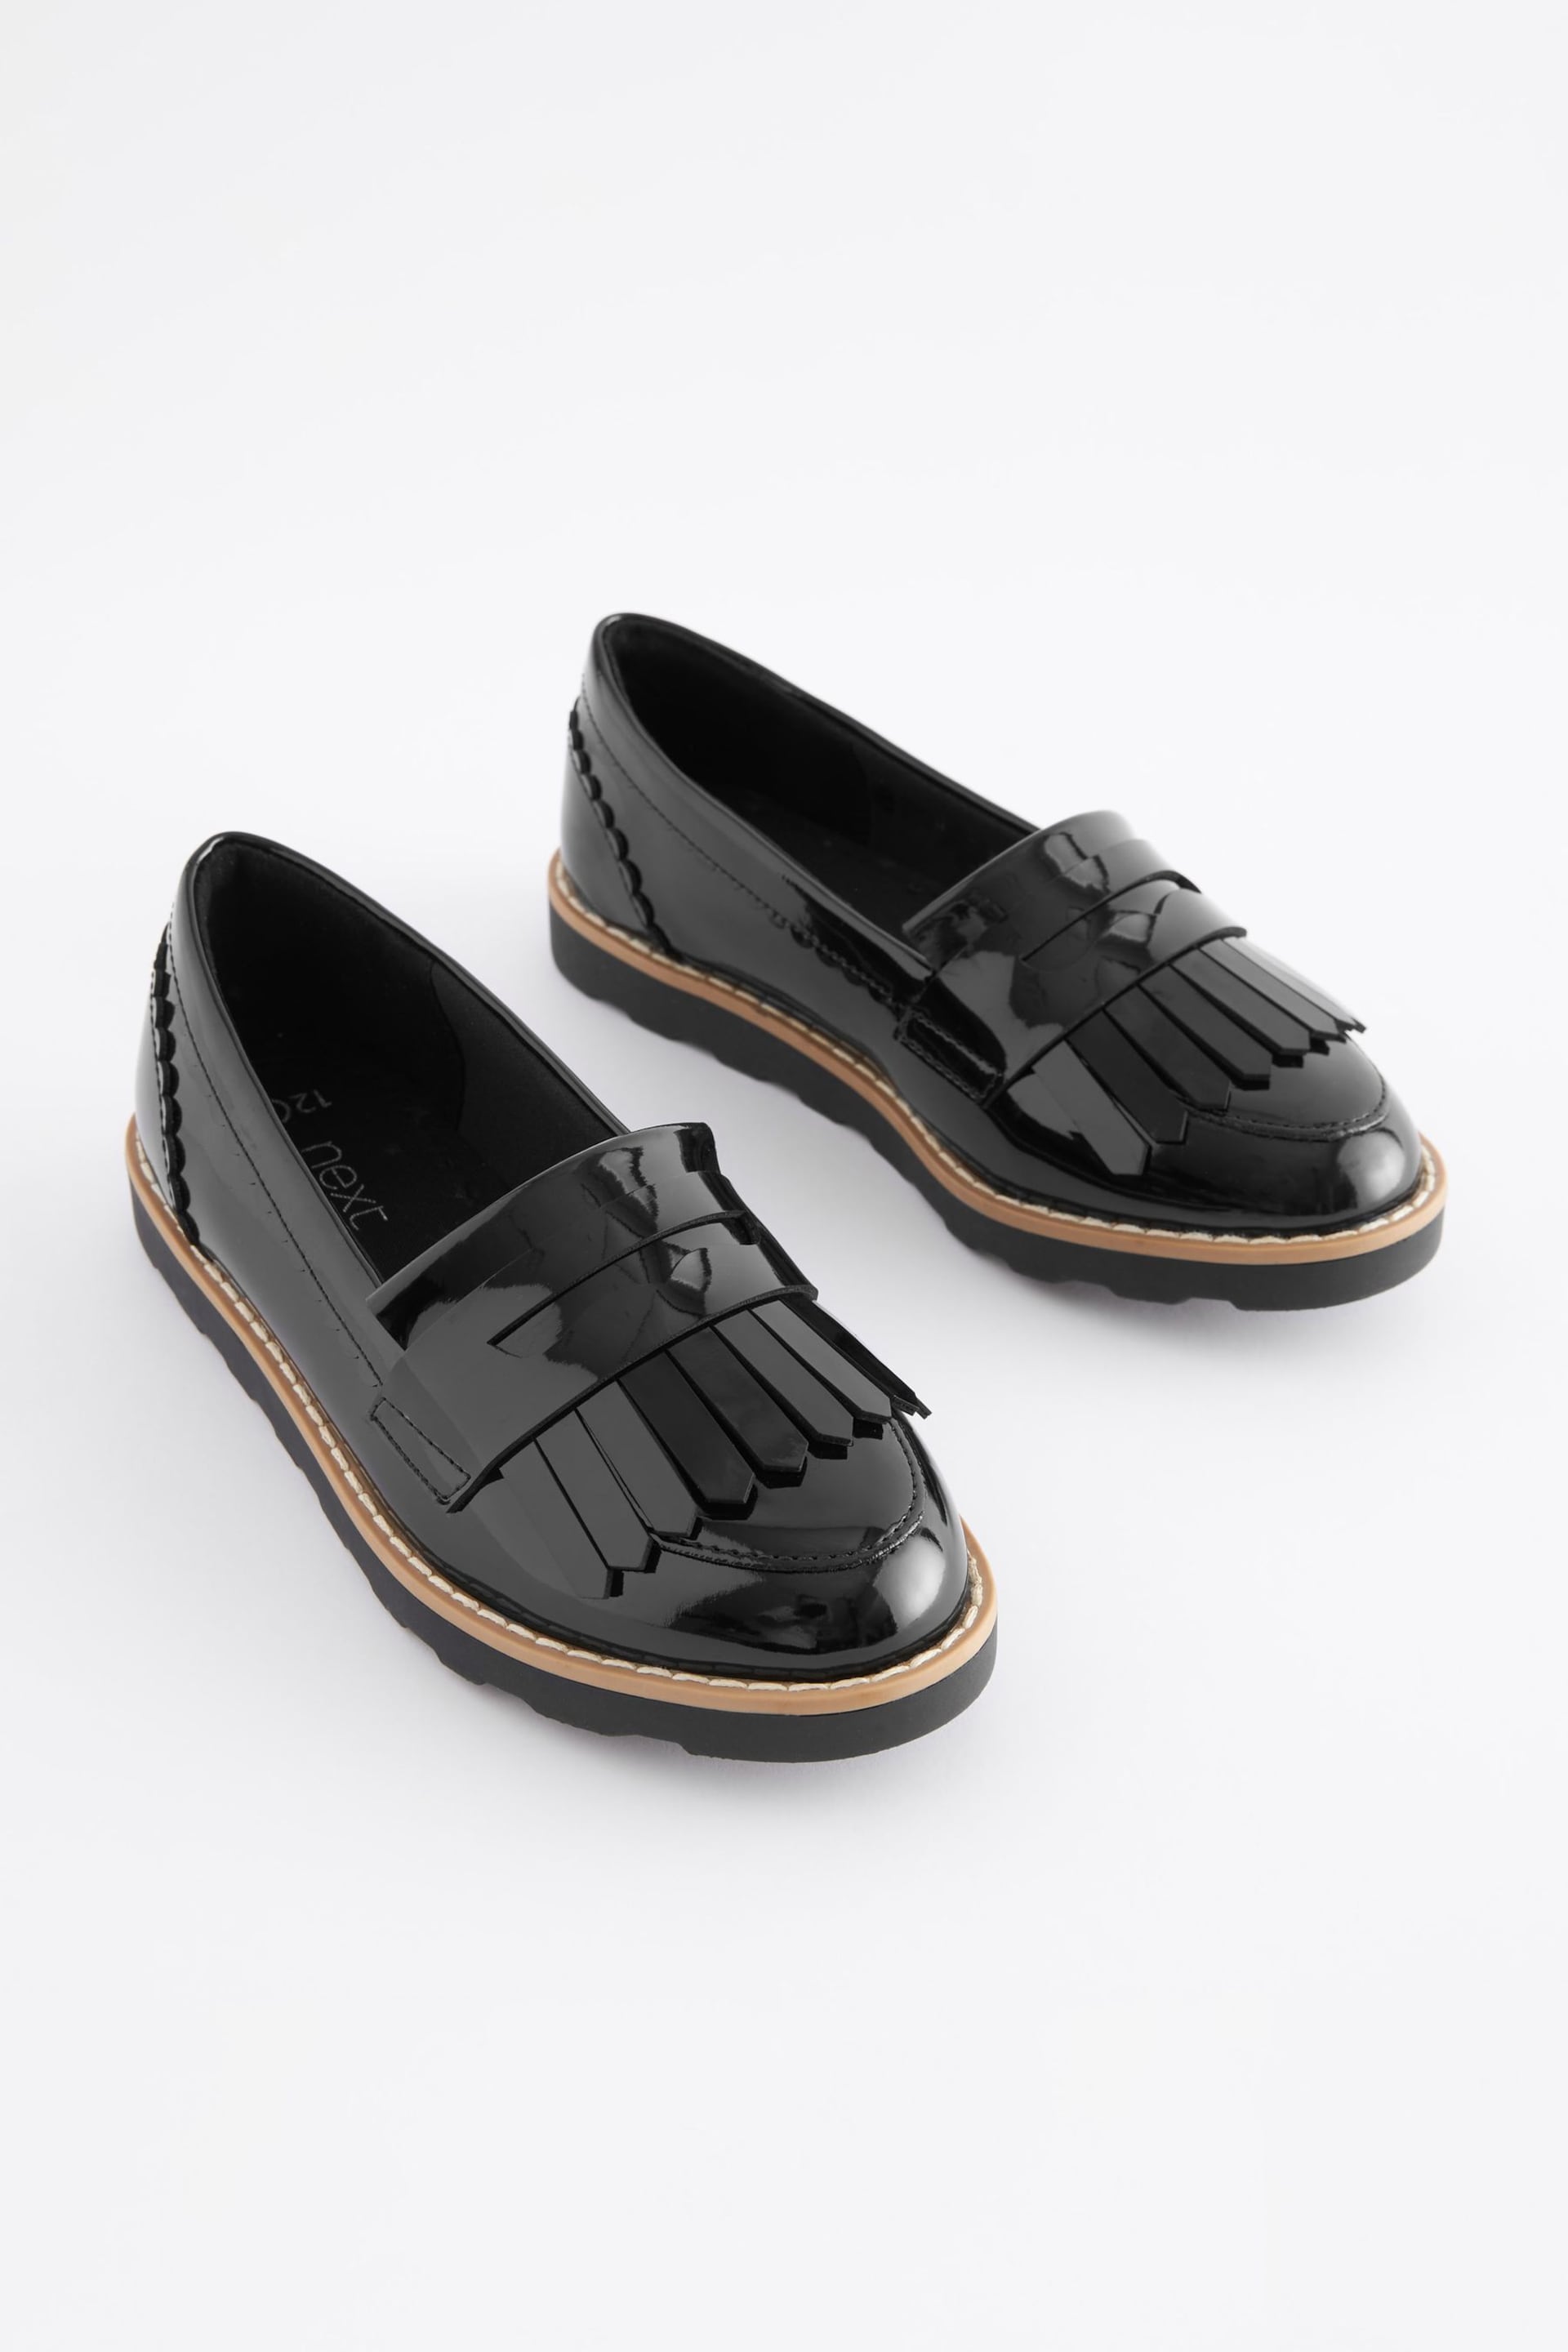 Black Patent Narrow Fit (E) School Tassel Loafers - Image 1 of 5